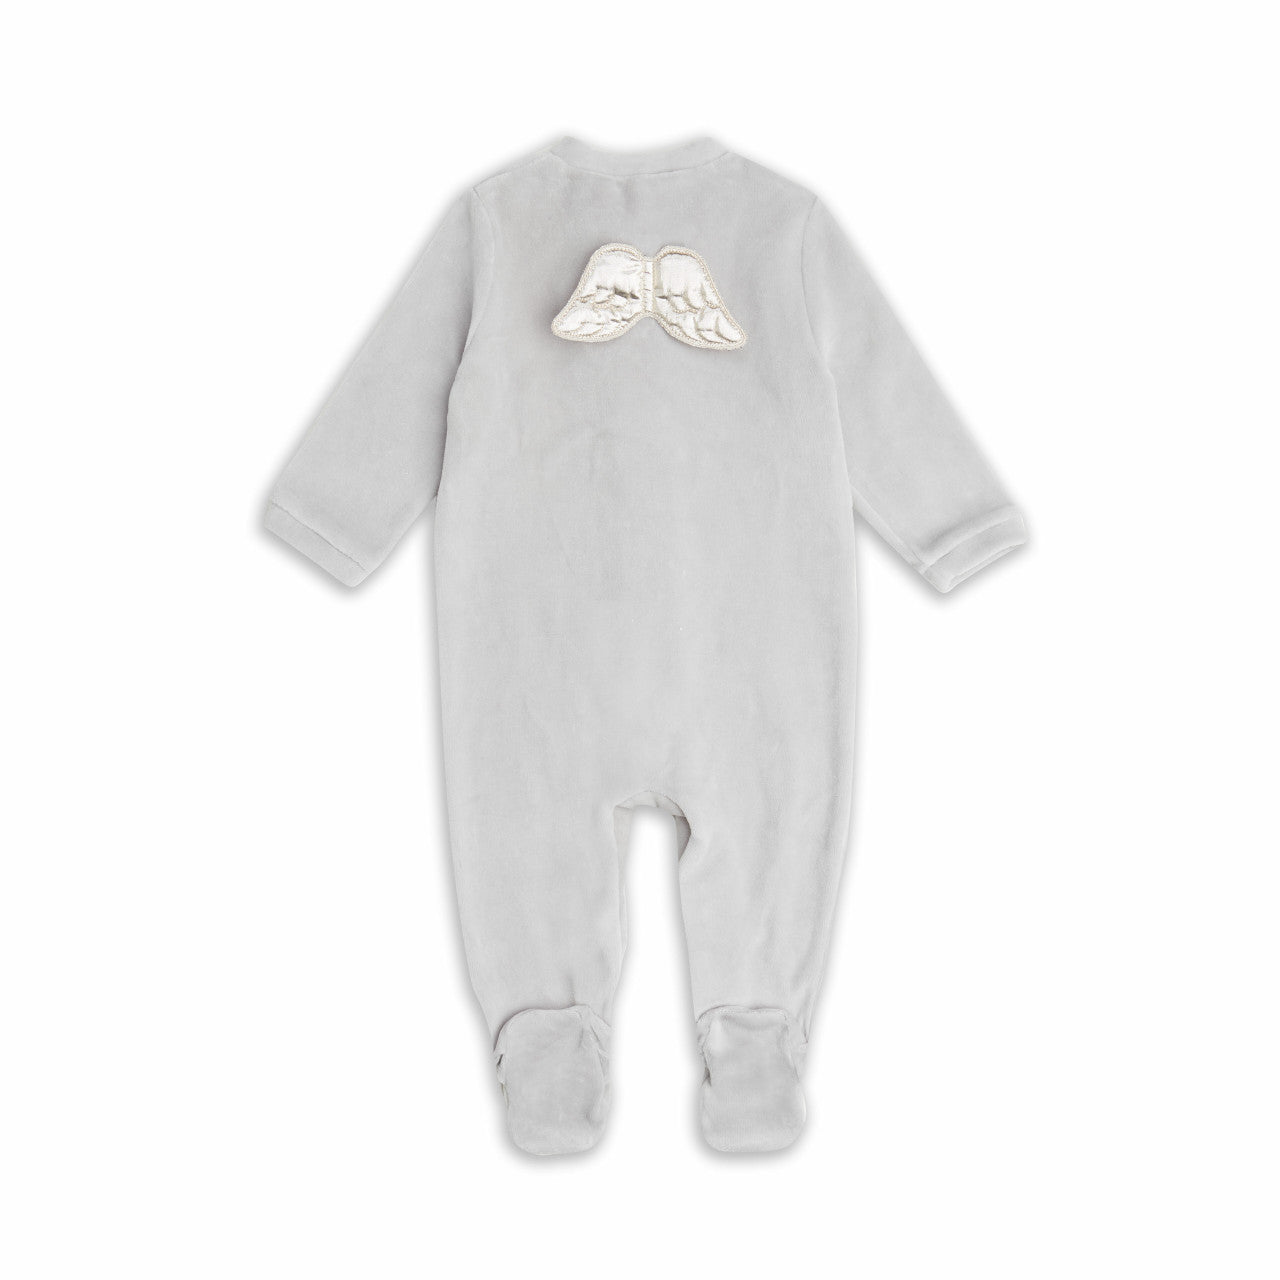 Marie-Chantal Silver Wing Grey Velour Sleeper at Bonjour Baby Baskets